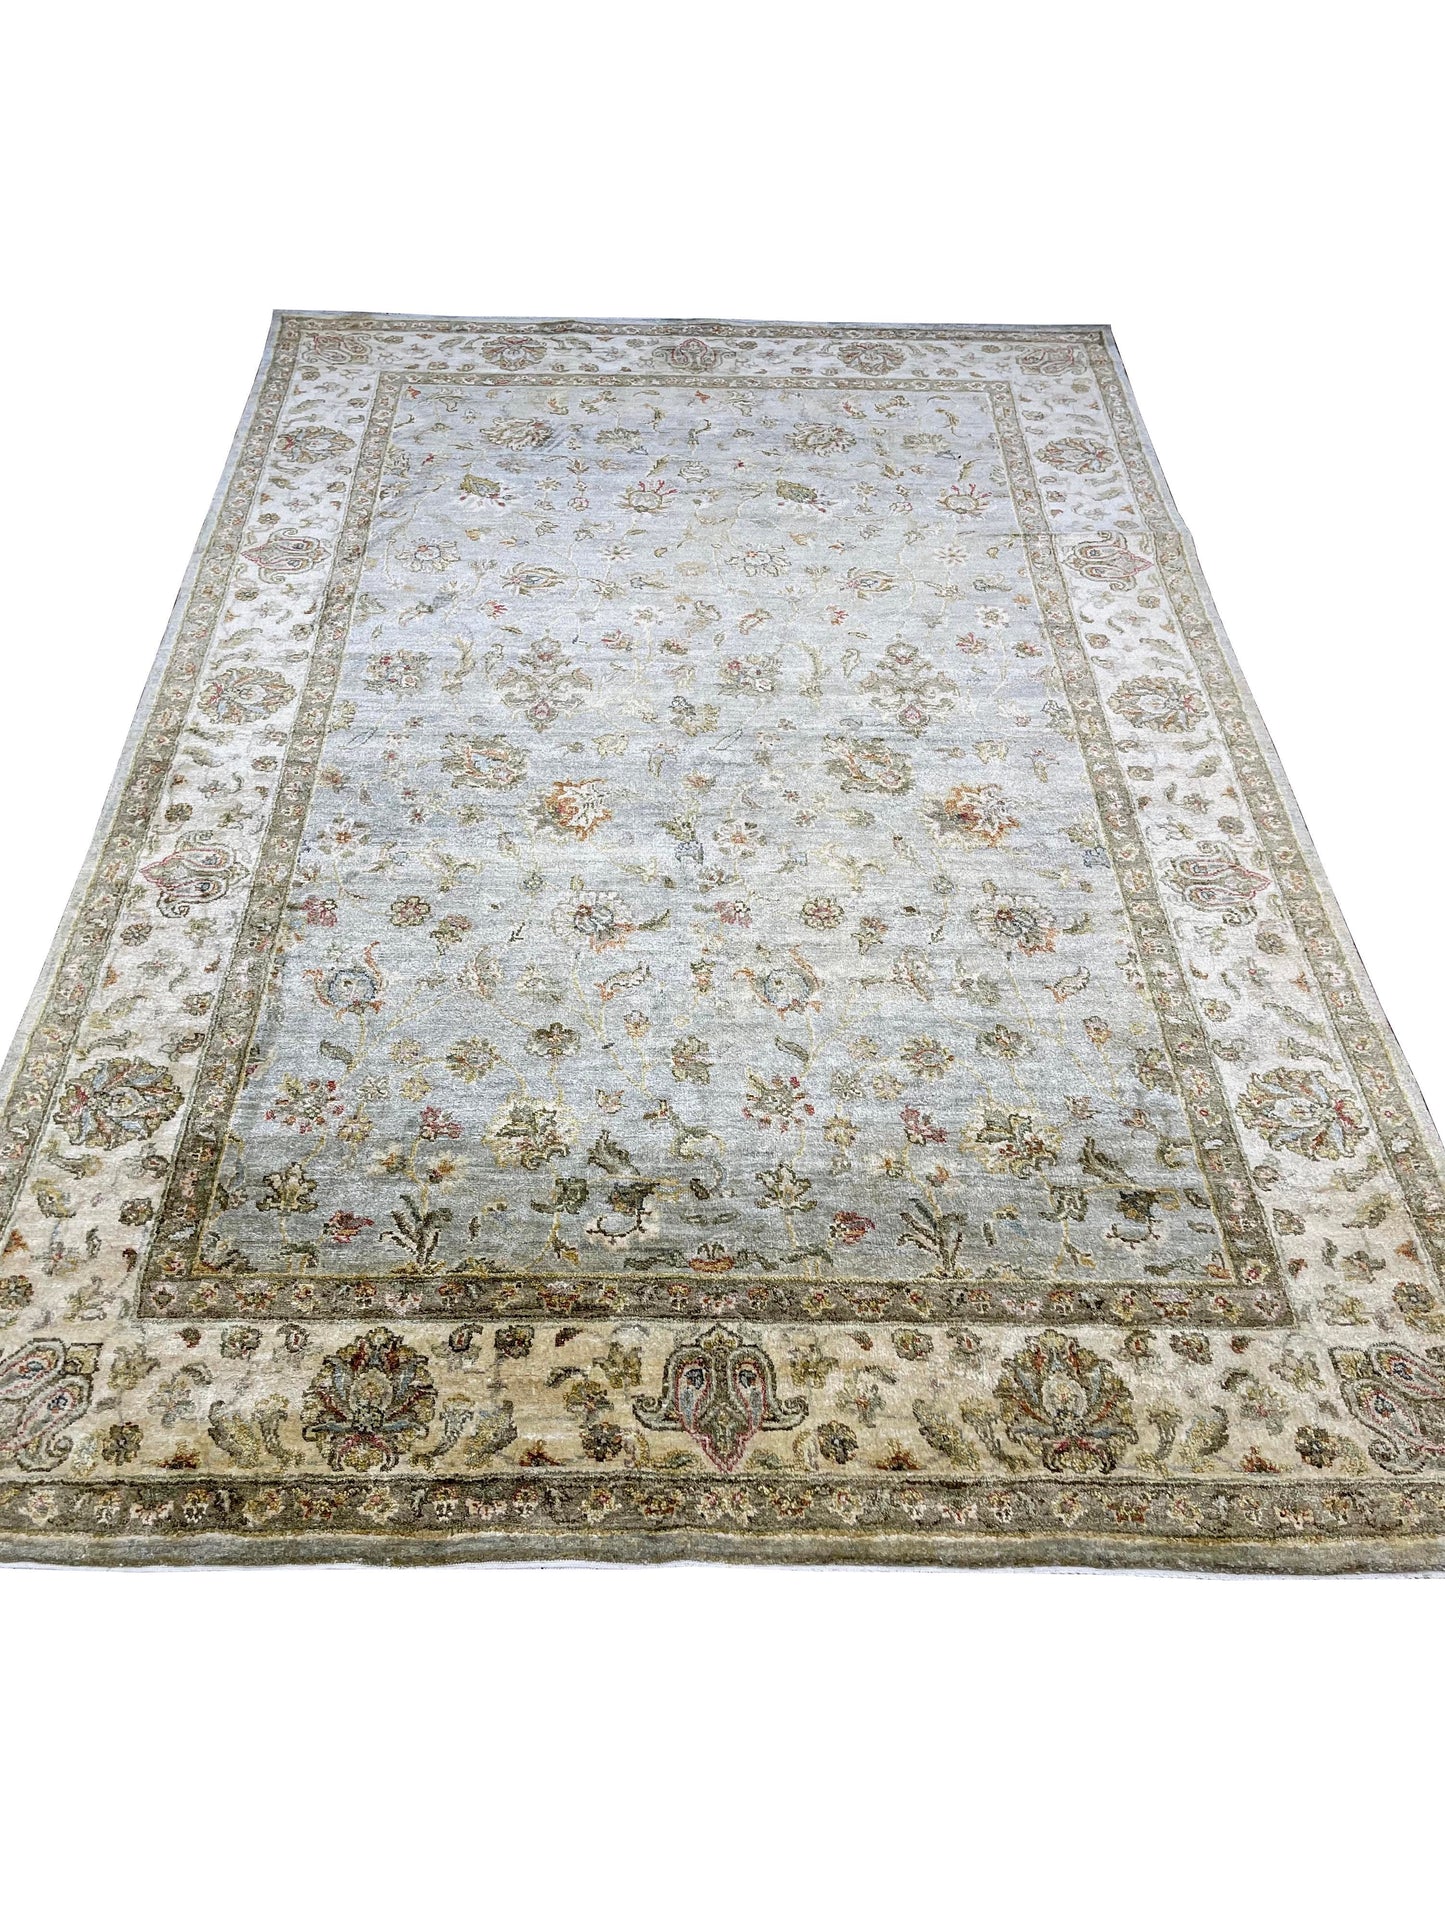 Get trendy with Silver and Camel Pure Silk Agra Handknotted Area Rug 5.11x9.0ft 179X276Cms - Traditional Rugs available at Jaipur Oriental Rugs. Grab yours for $3835.00 today!